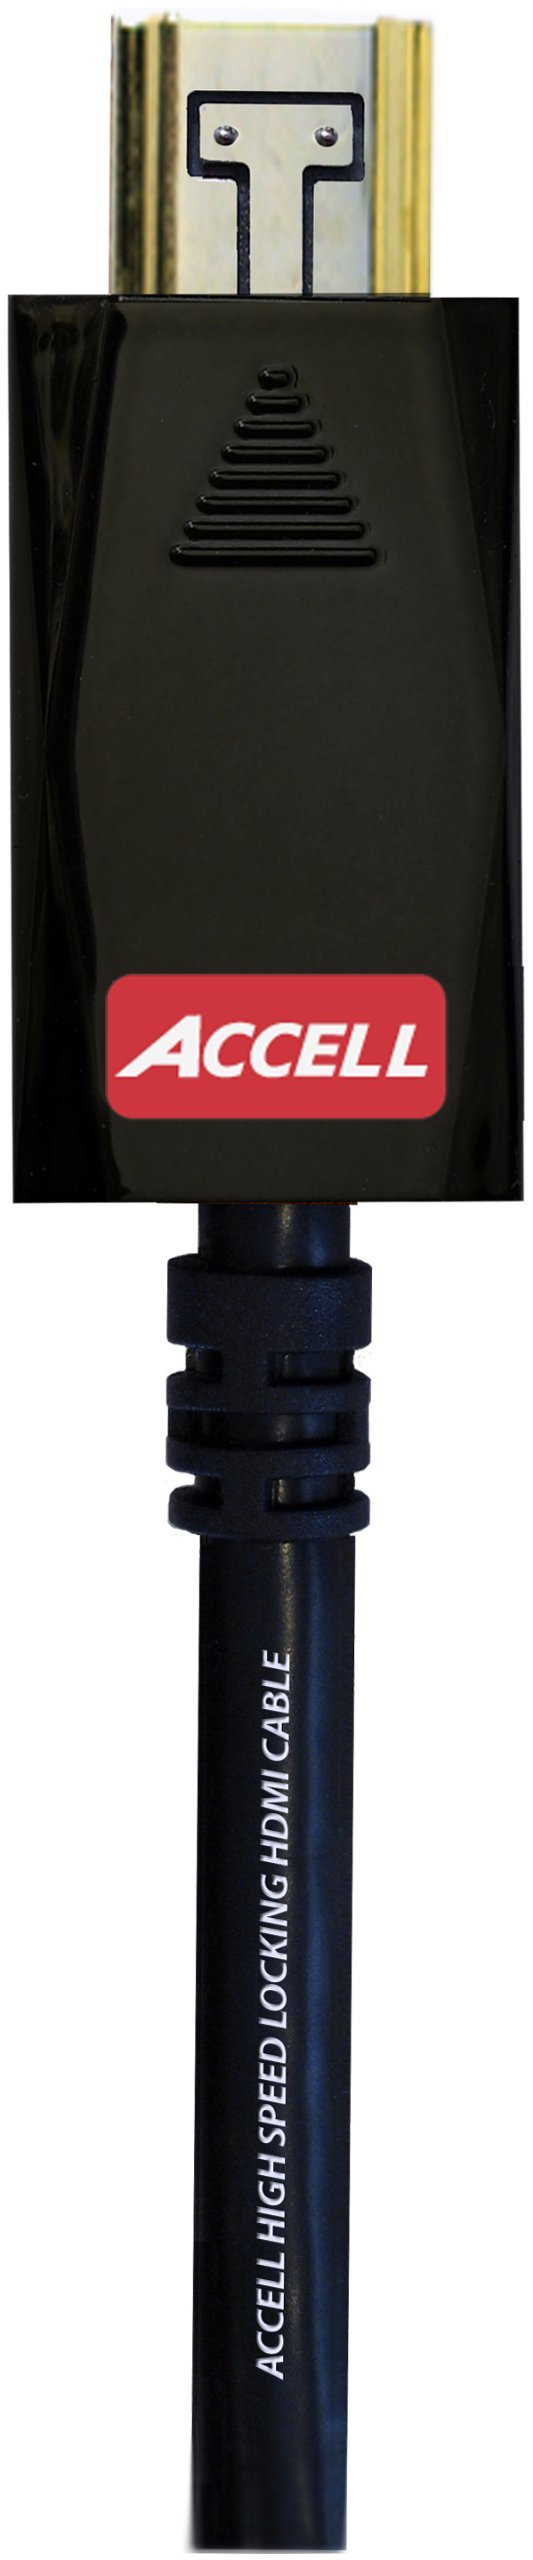 Accell Avgrip Pro HDMI Cable - High Speed HDMI Cable with Locking Connectors - 1 Foot, HDMI 2.0 Compliant for 4K UHD @60Hz - Polybag 1 Foot (0.3 Meters) Poly Bag Packaging